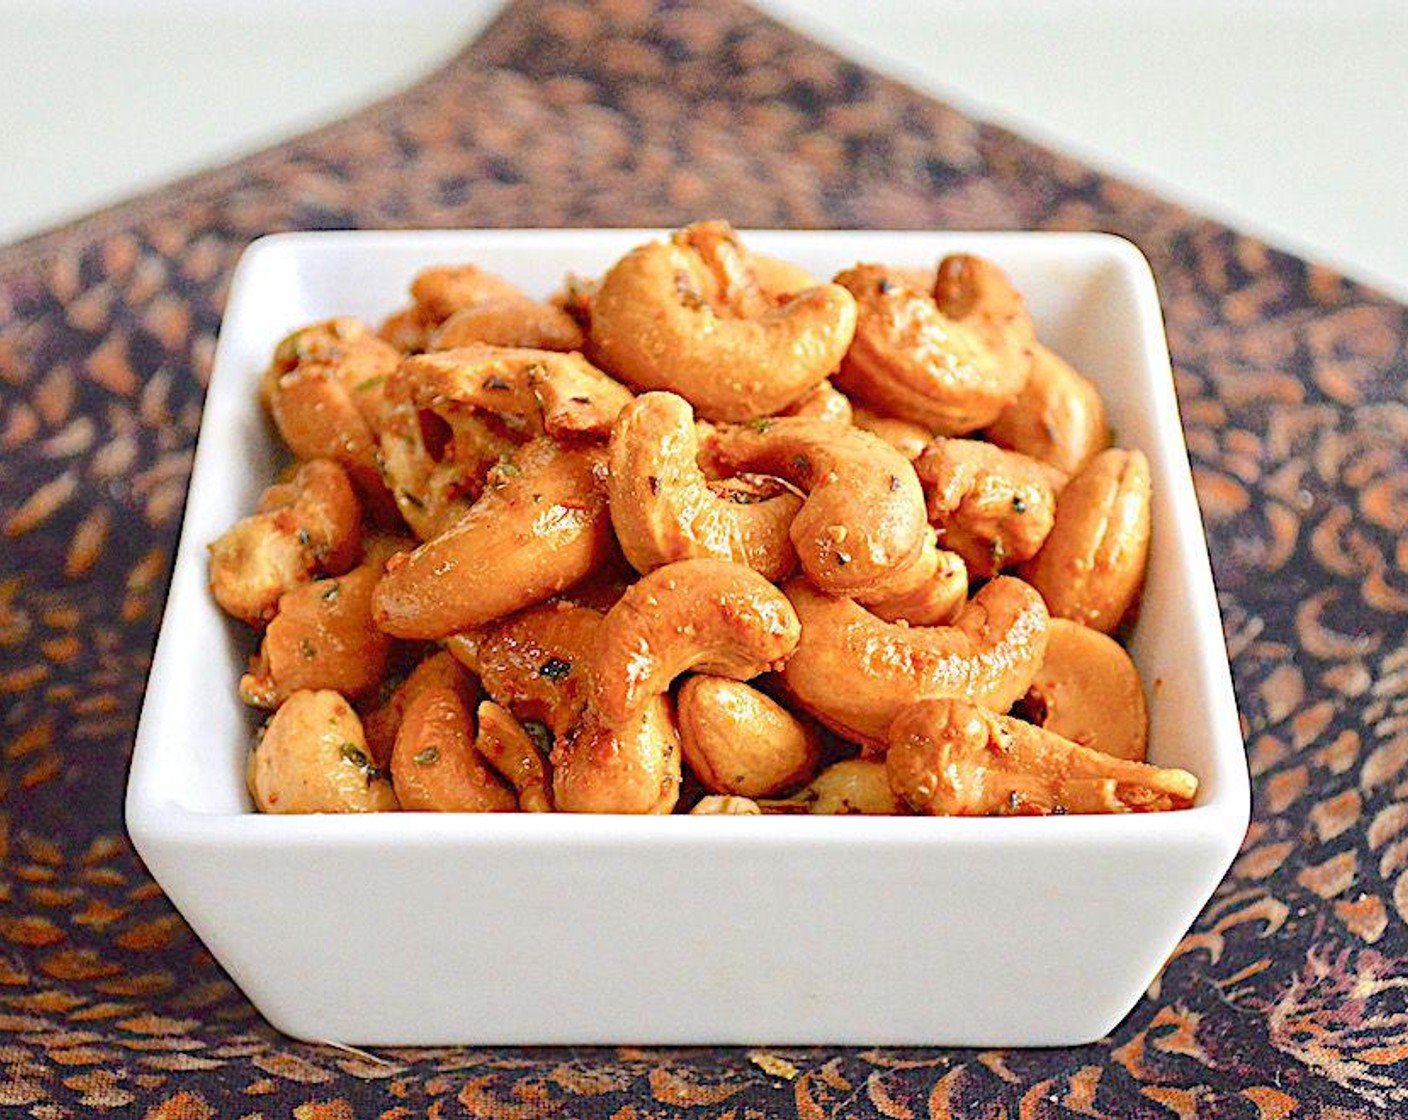 step 3 Spread the coated cashews out in a single layer on the sheet tray and roast them for about 10 minutes. Serve them immediately for a yummy snack!